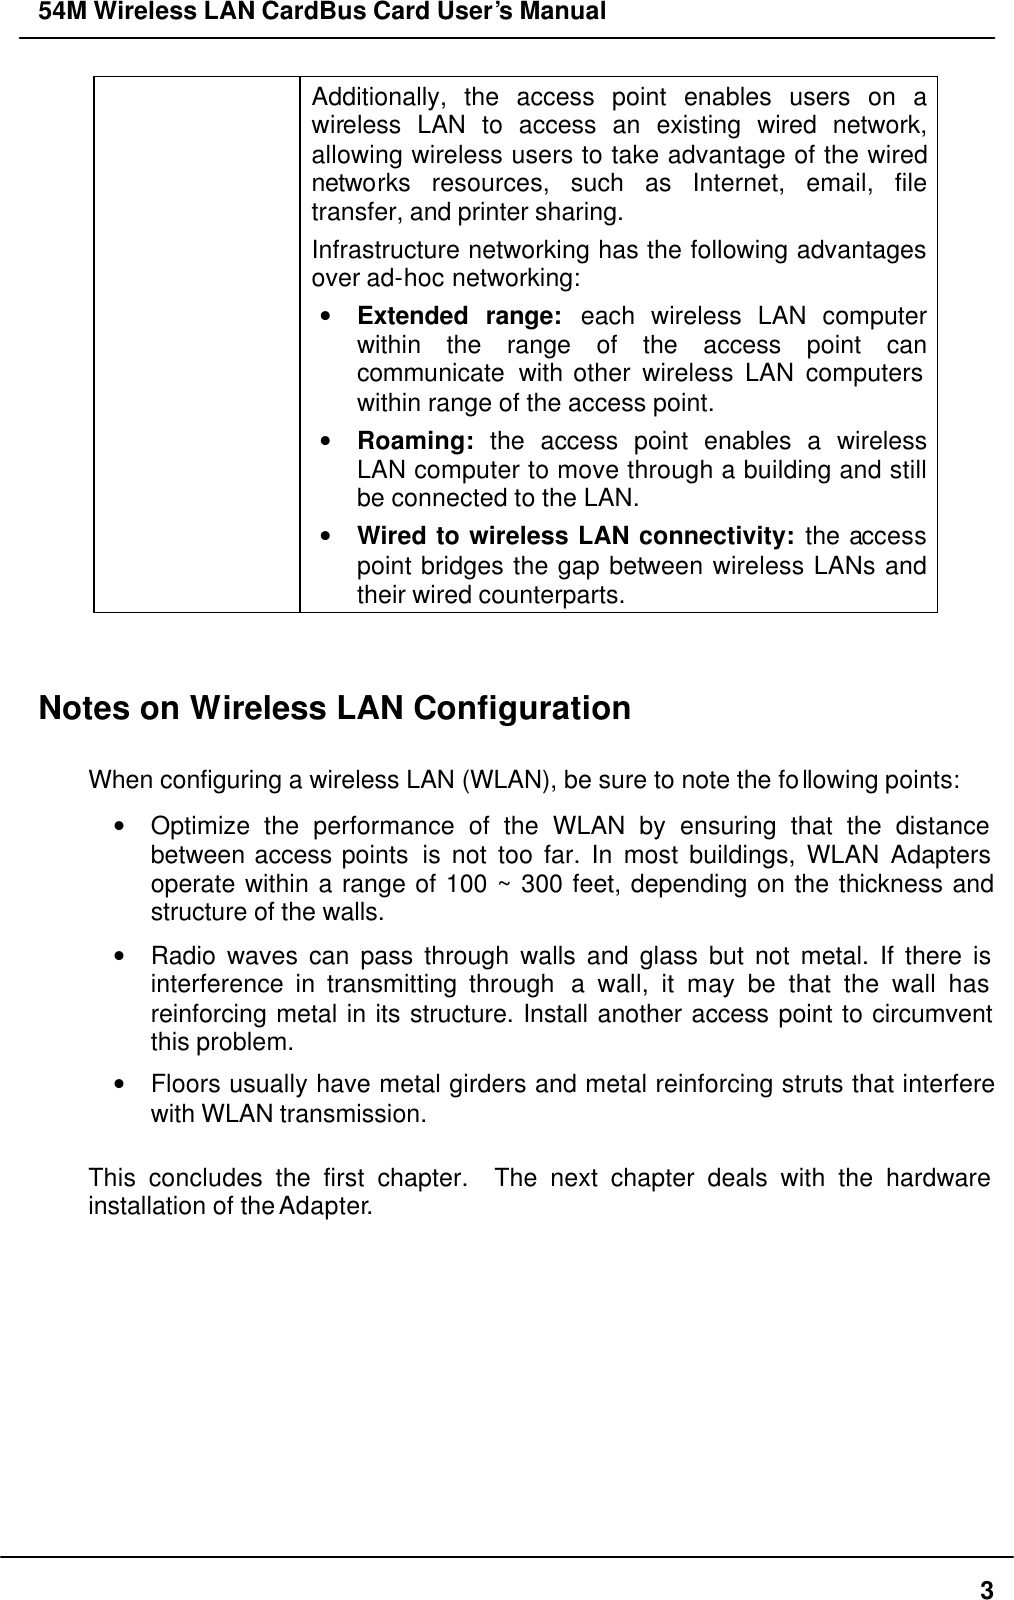 54M Wireless LAN CardBus Card User’s Manual  3 Additionally, the access point enables users on a wireless LAN to access an existing wired network, allowing wireless users to take advantage of the wired networks resources, such as Internet, email, file transfer, and printer sharing.   Infrastructure networking has the following advantages over ad-hoc networking: • Extended range: each wireless LAN computer within the range of the access point can communicate with other wireless LAN computers within range of the access point. • Roaming: the access point enables a wireless LAN computer to move through a building and still be connected to the LAN. • Wired to wireless LAN connectivity: the access point bridges the gap between wireless LANs and their wired counterparts.   Notes on Wireless LAN Configuration  When configuring a wireless LAN (WLAN), be sure to note the following points: • Optimize the performance of the WLAN by ensuring that the distance between access points  is not too far. In most buildings, WLAN Adapters operate within a range of 100 ~ 300 feet, depending on the thickness and structure of the walls.   • Radio waves can pass through walls and glass but not metal. If there is interference in transmitting through  a wall, it may be that the wall has reinforcing metal in its structure. Install another access point to circumvent this problem. • Floors usually have metal girders and metal reinforcing struts that interfere with WLAN transmission.  This concludes the first chapter.  The next chapter deals with the hardware installation of the Adapter.    